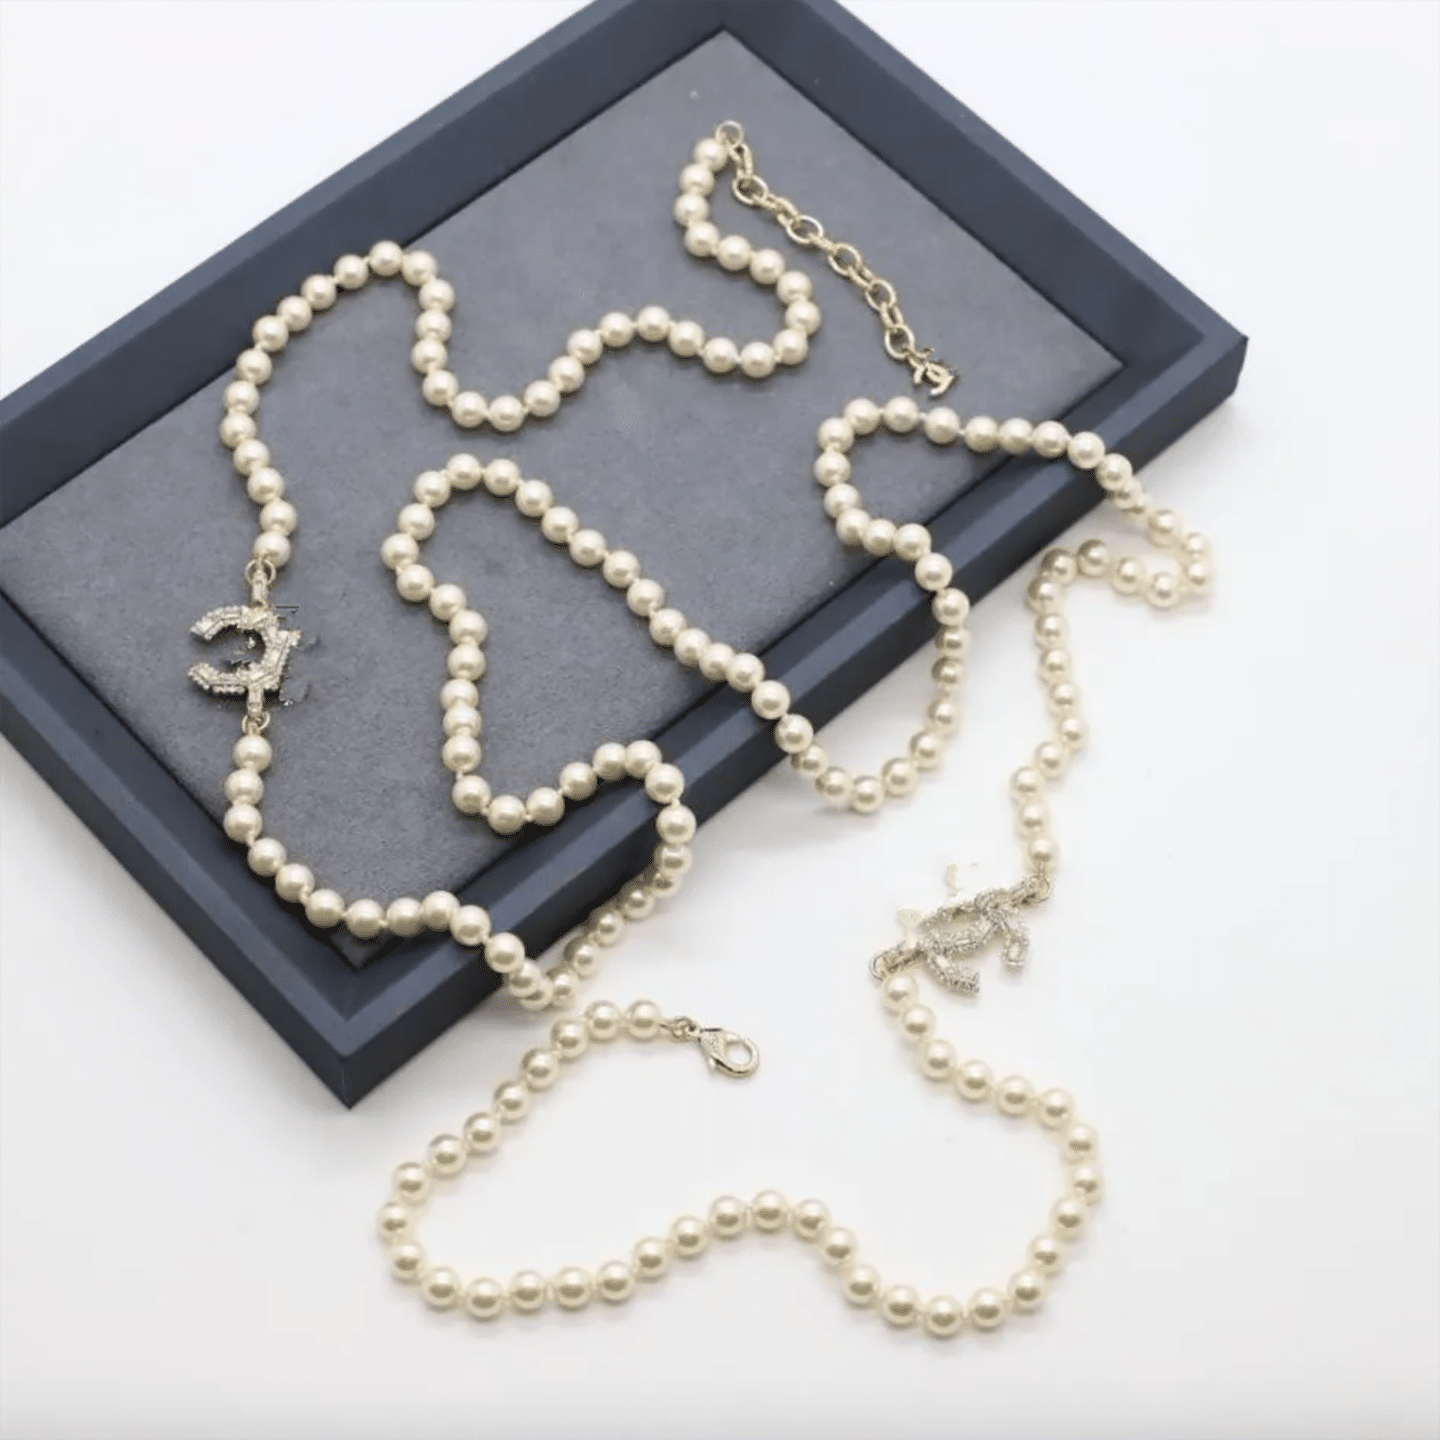 Chanel Jewelry Add Timeless Elegance to Any Look  Handbags and  Accessories  Sothebys